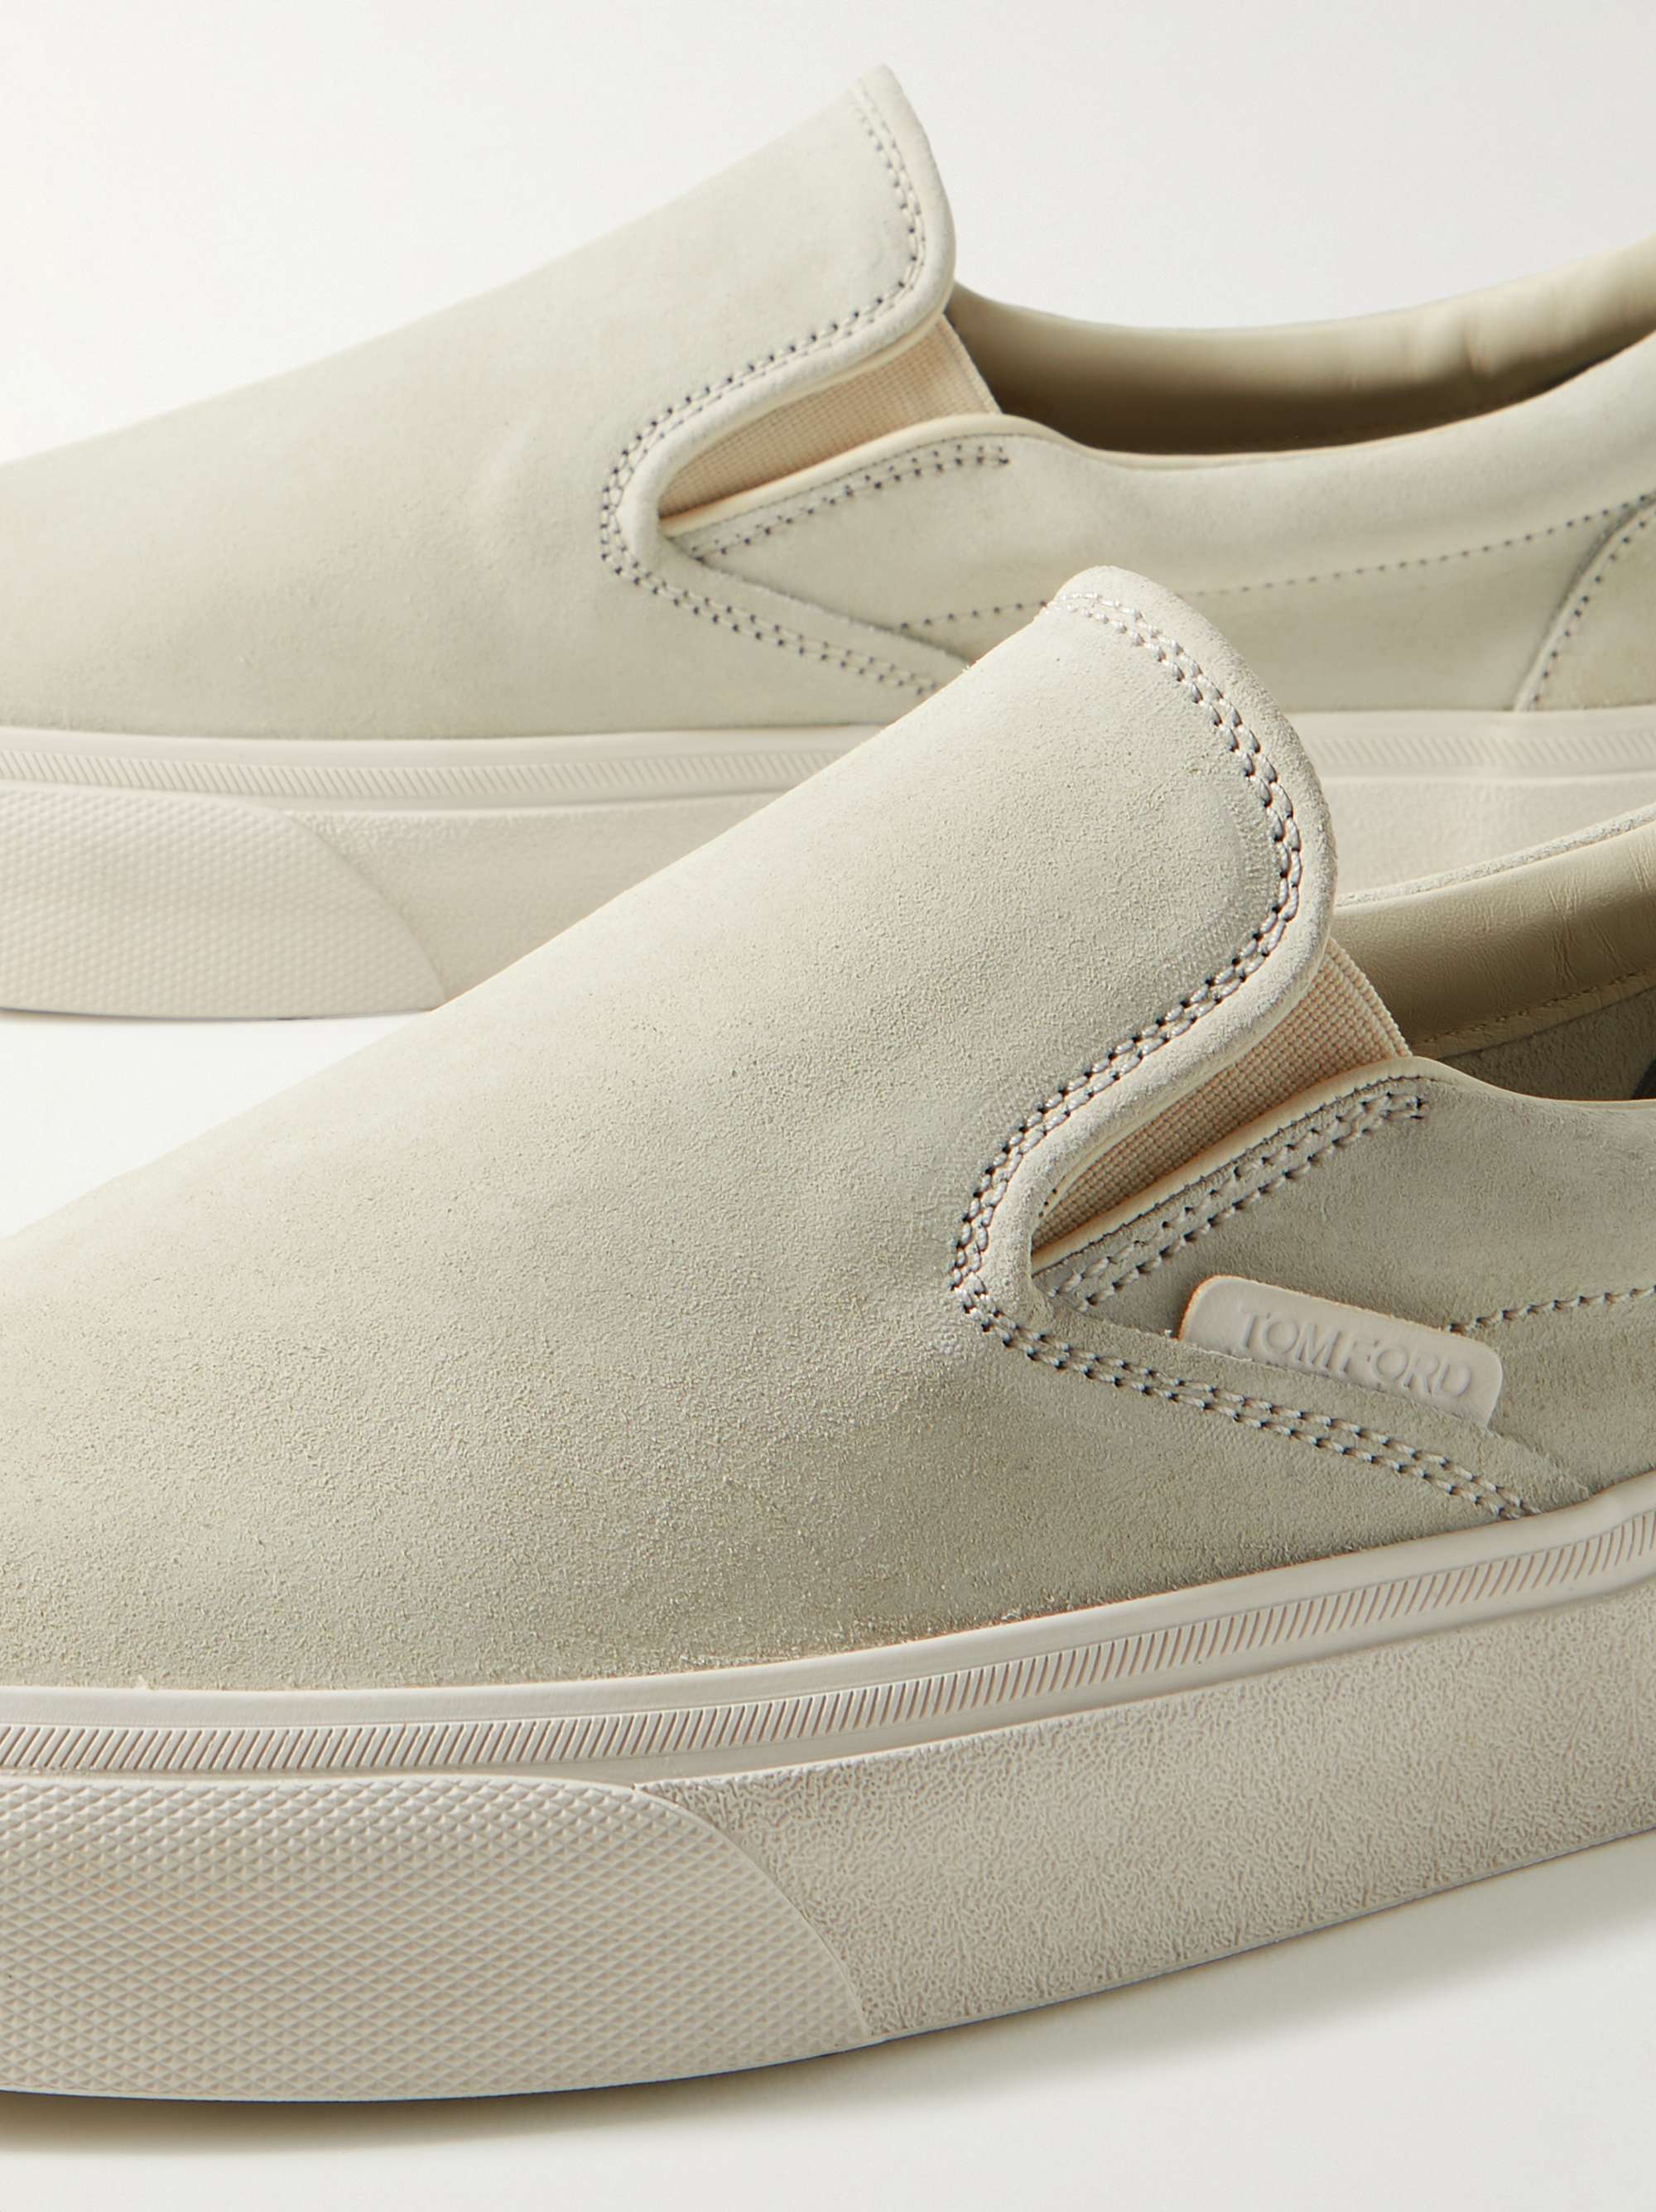 TOM FORD Jude Suede Slip-On Sneakers